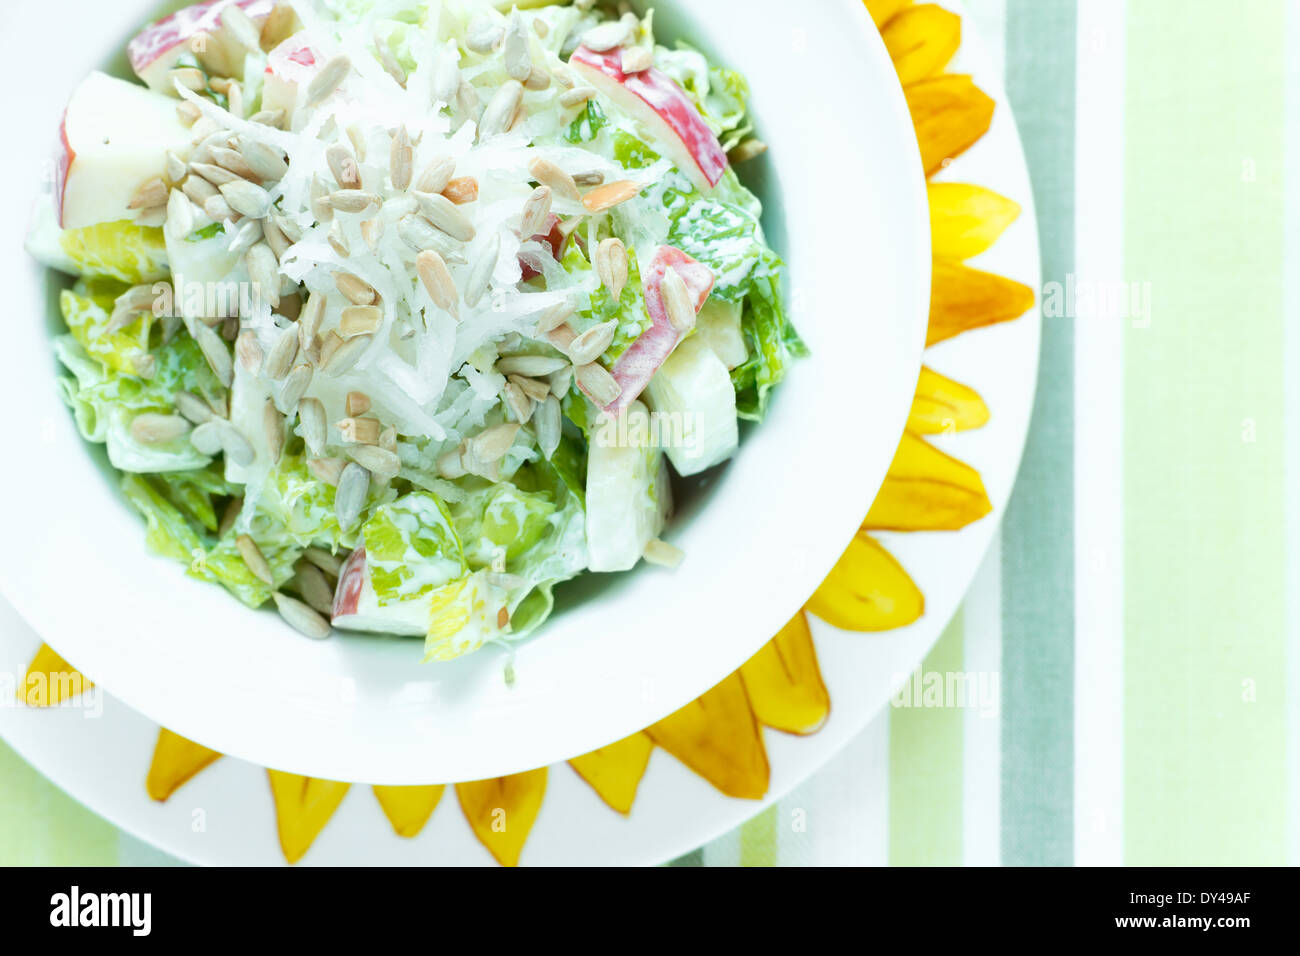 Summer salad with fresh crunchy apples and roasted raw sunflower seeds Stock Photo